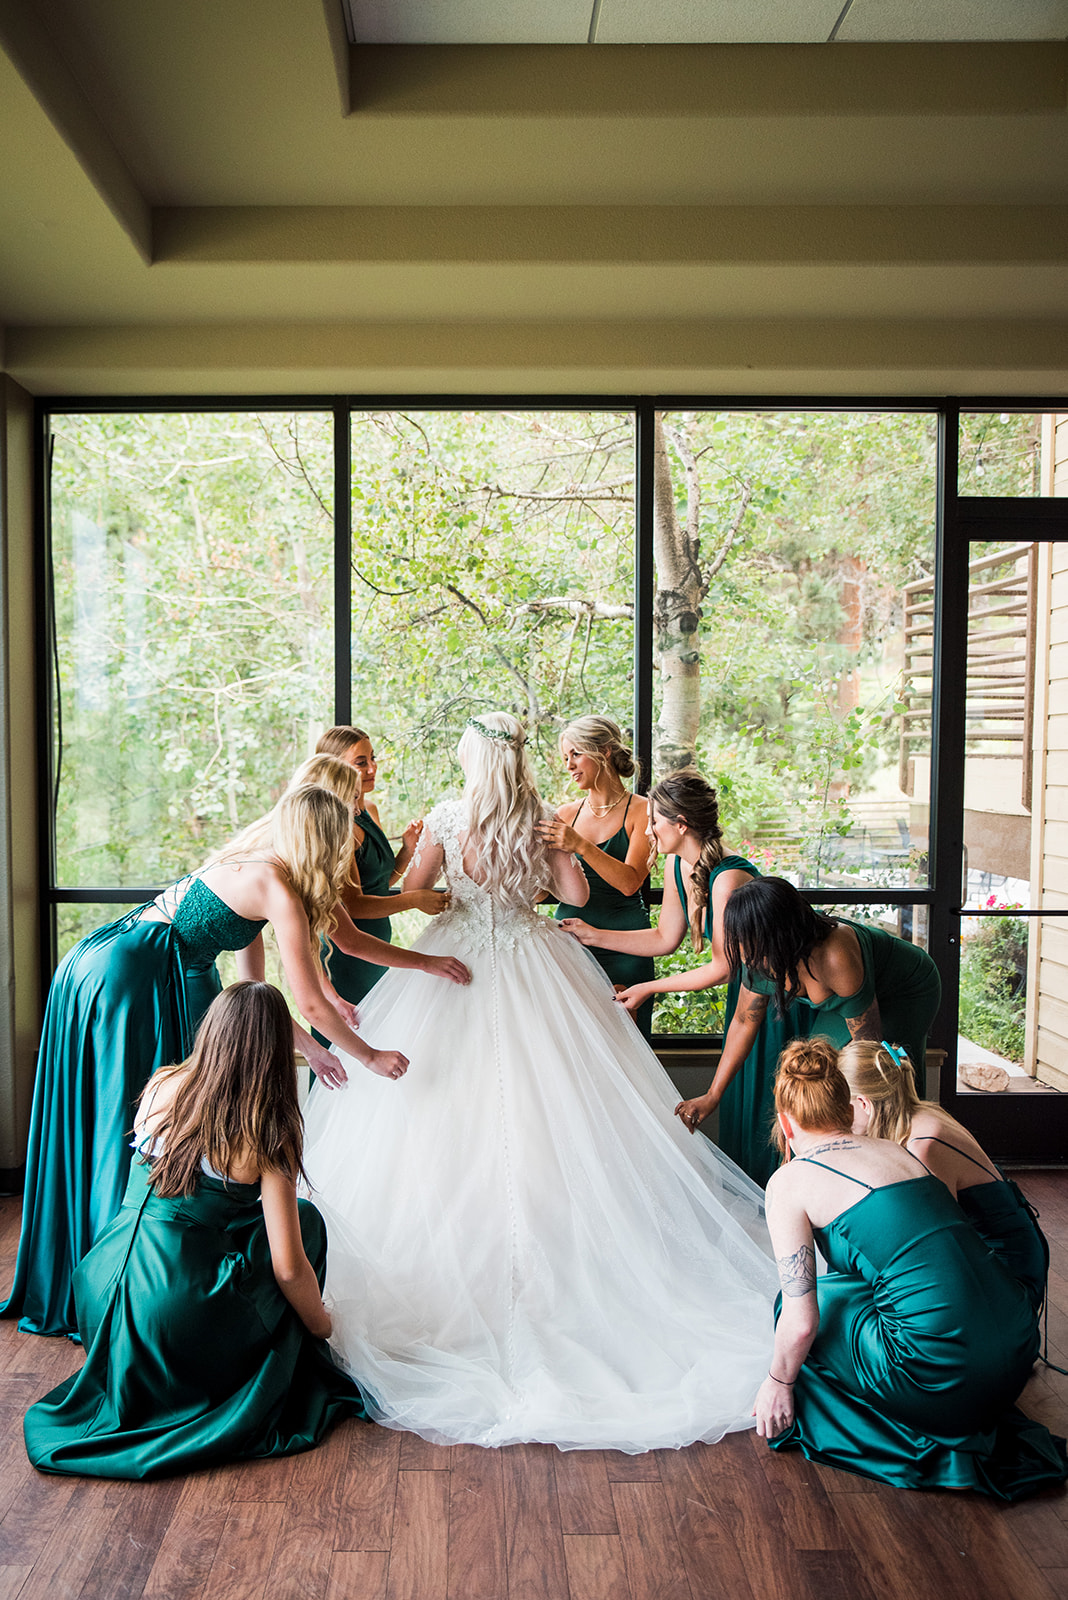 Brides faces window as her bridesmaids fluff her dress.